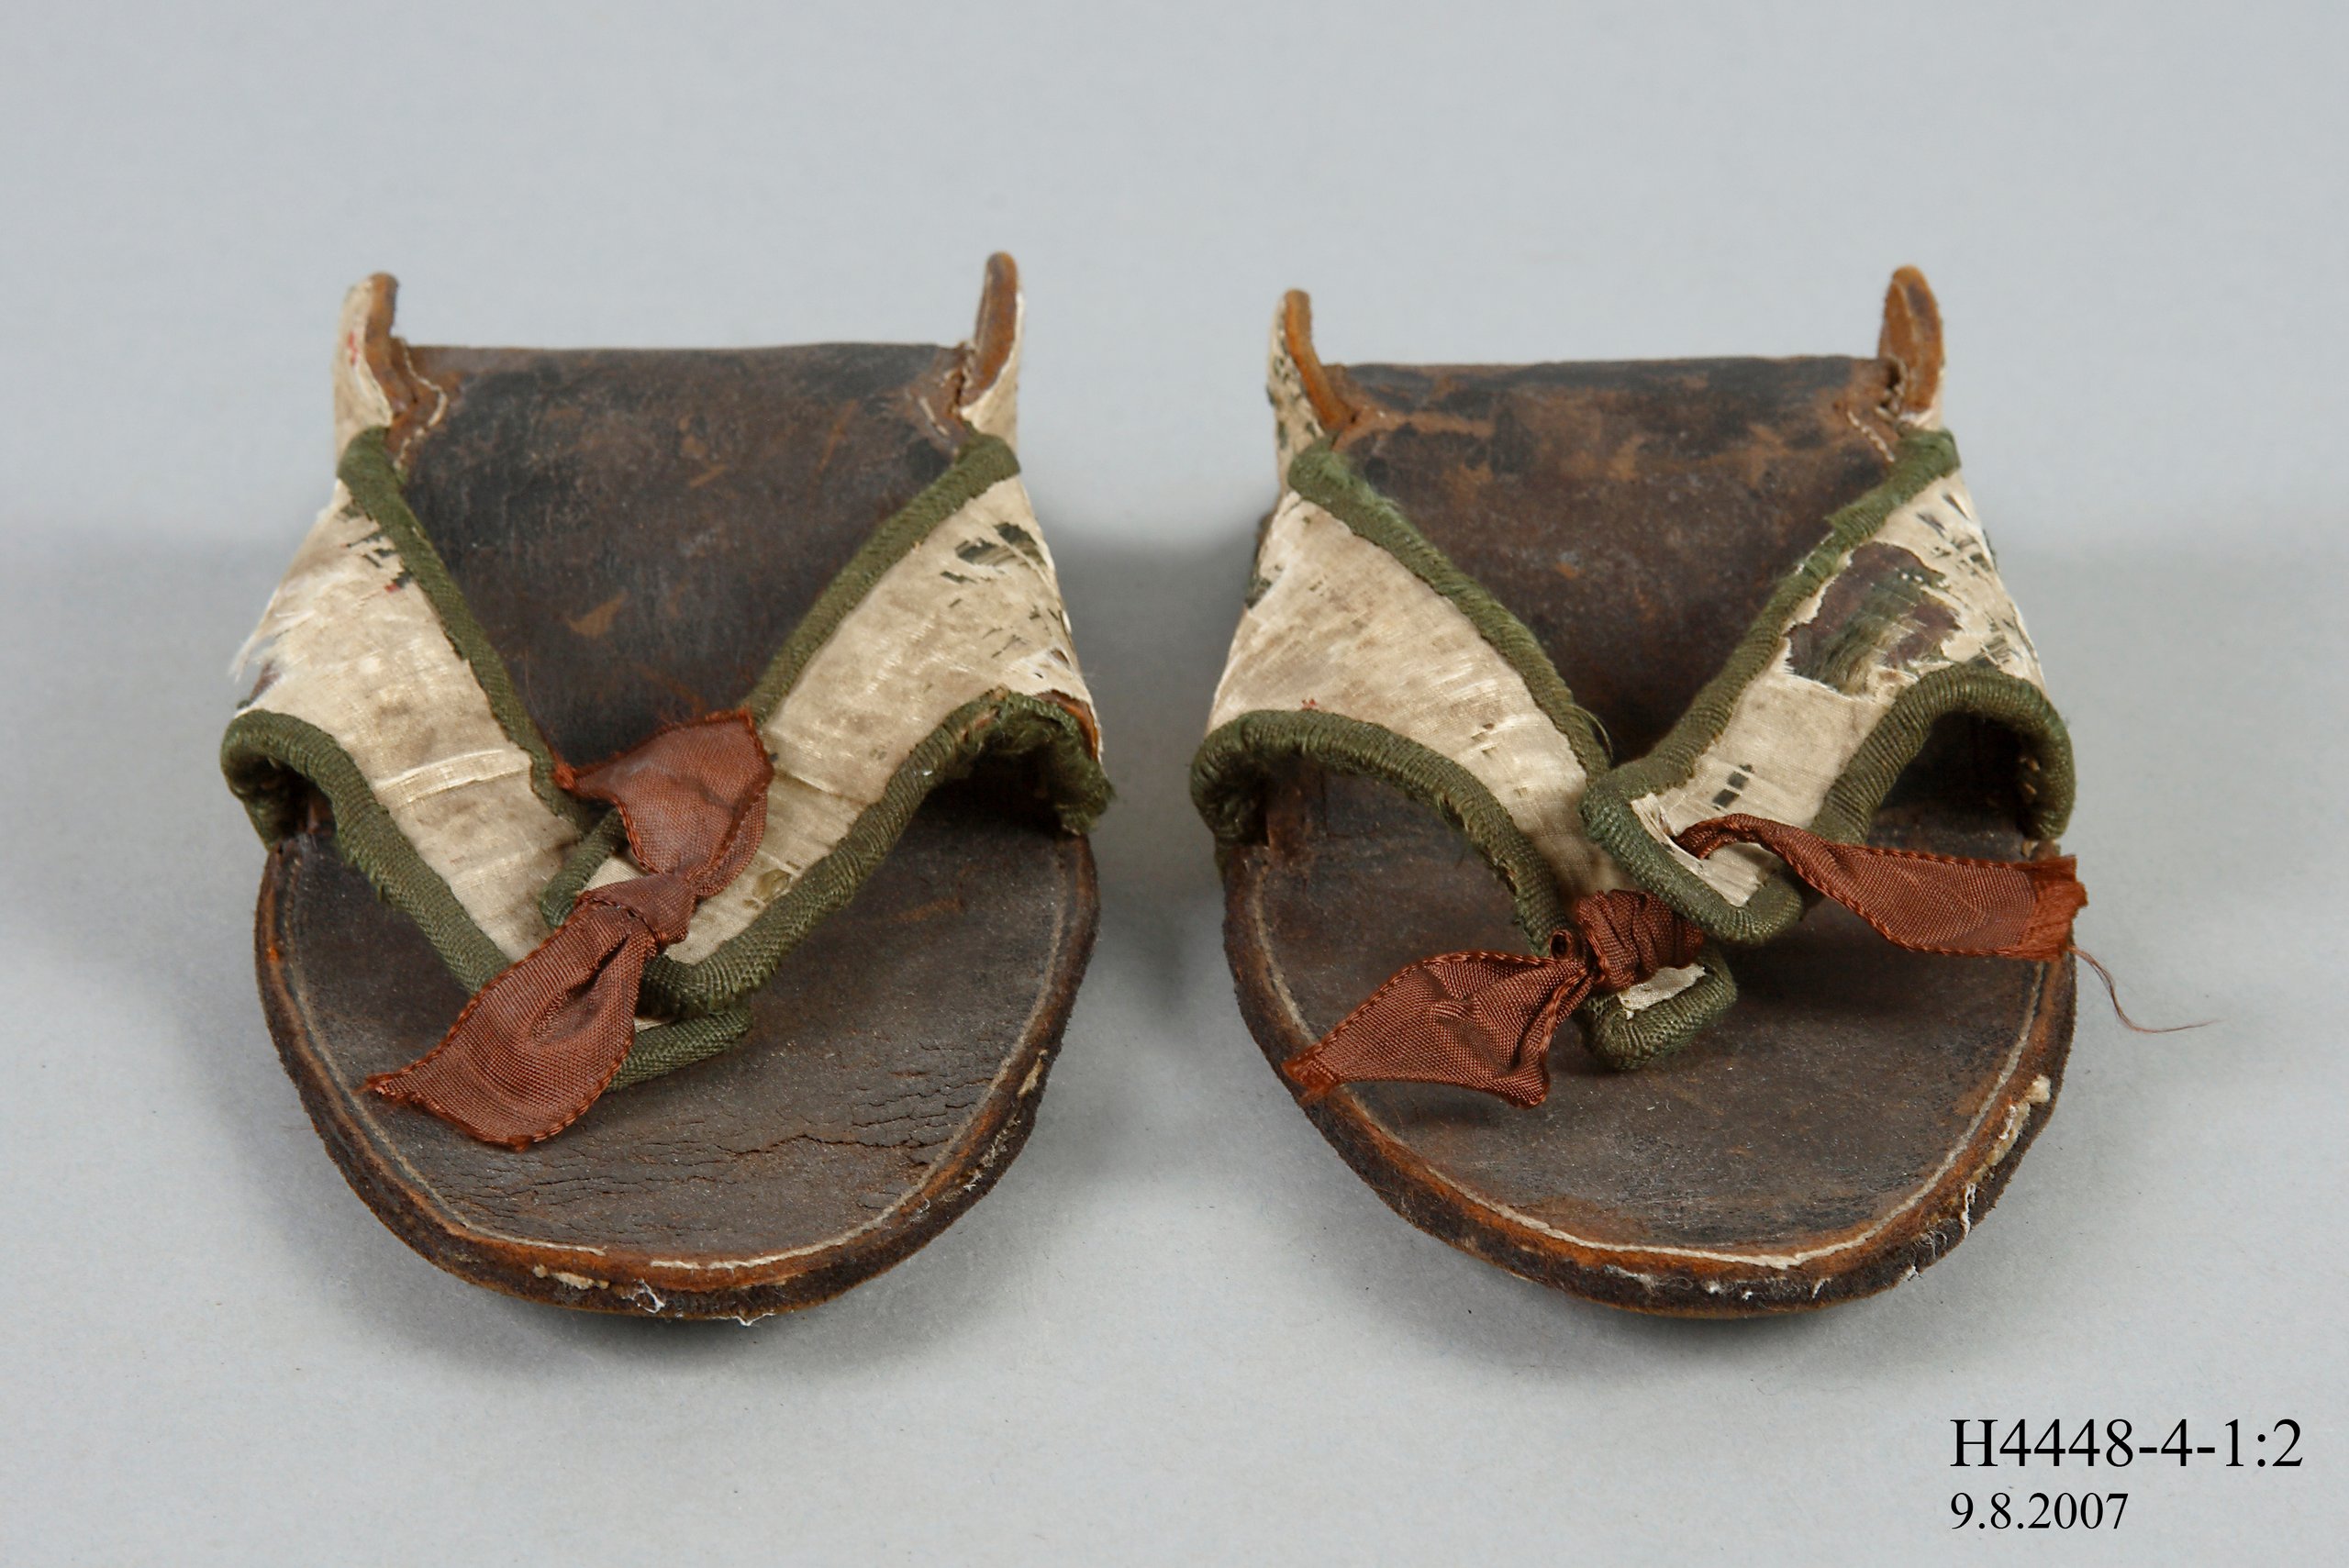 Pair of clog overshoes from the Joseph Box collection